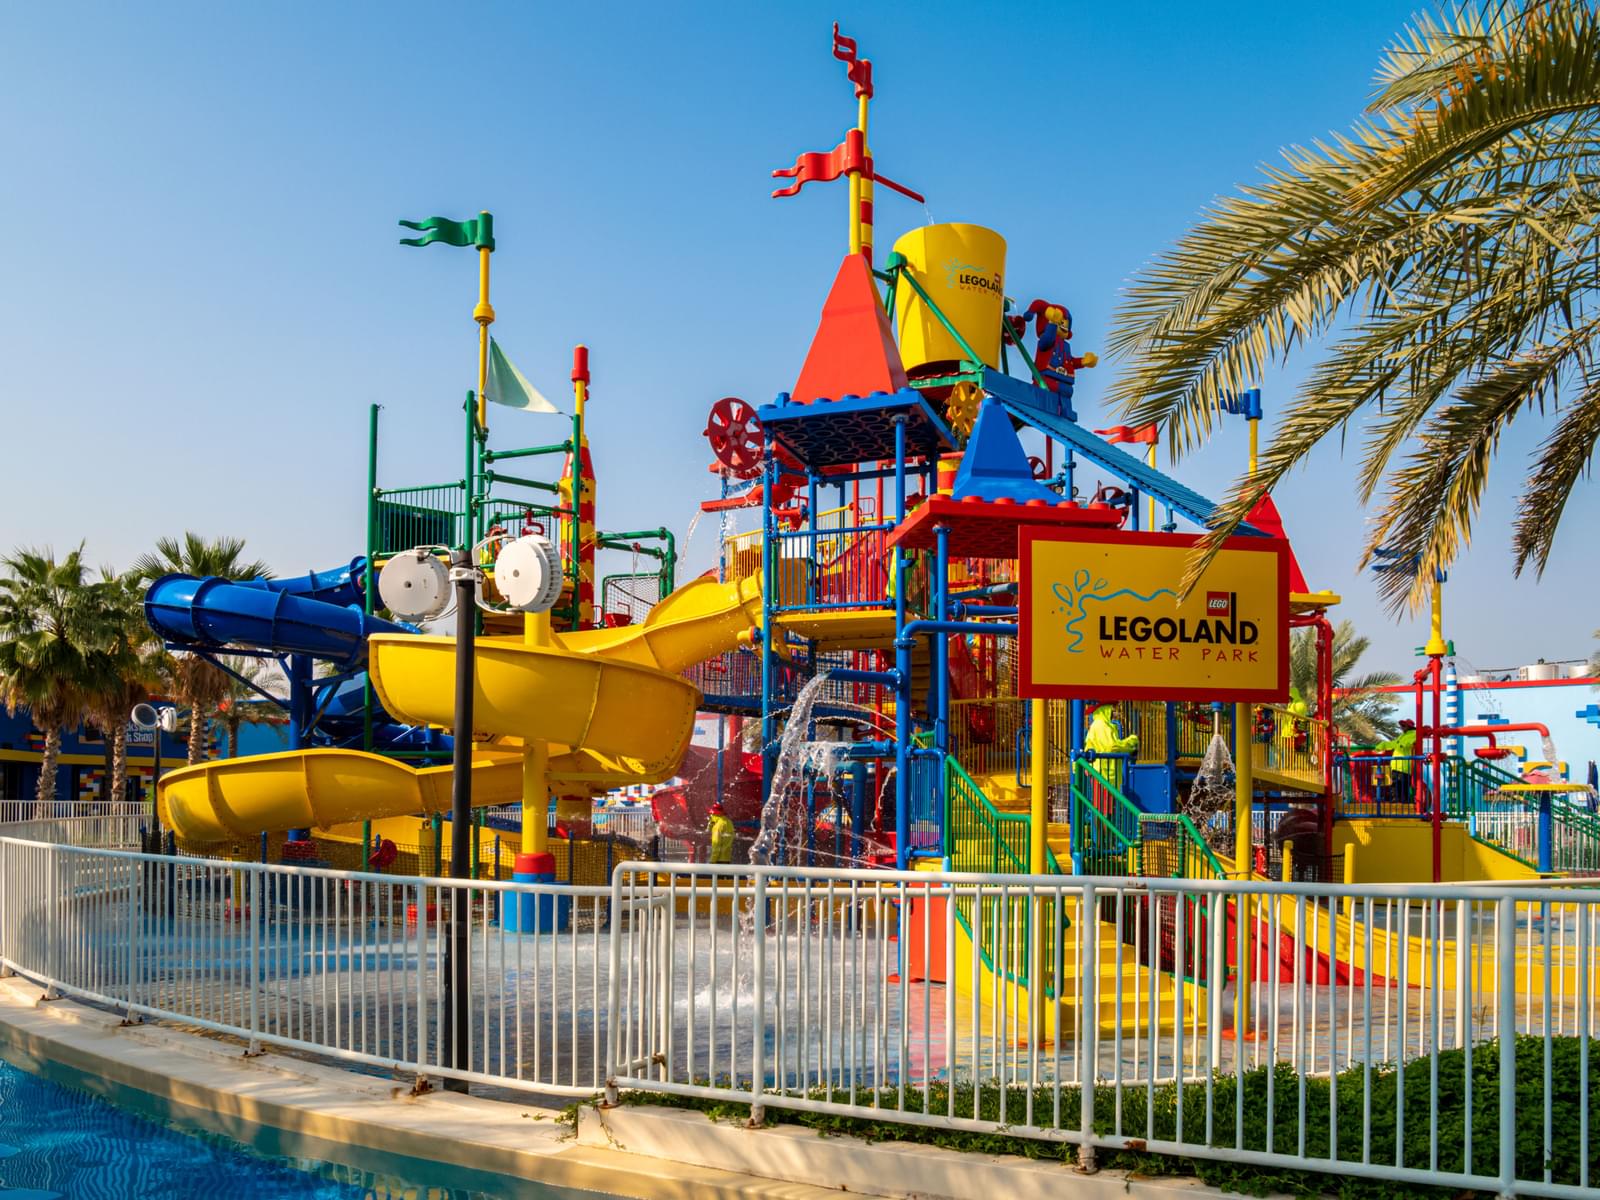 Why Should You Go To Legoland Waterpark?